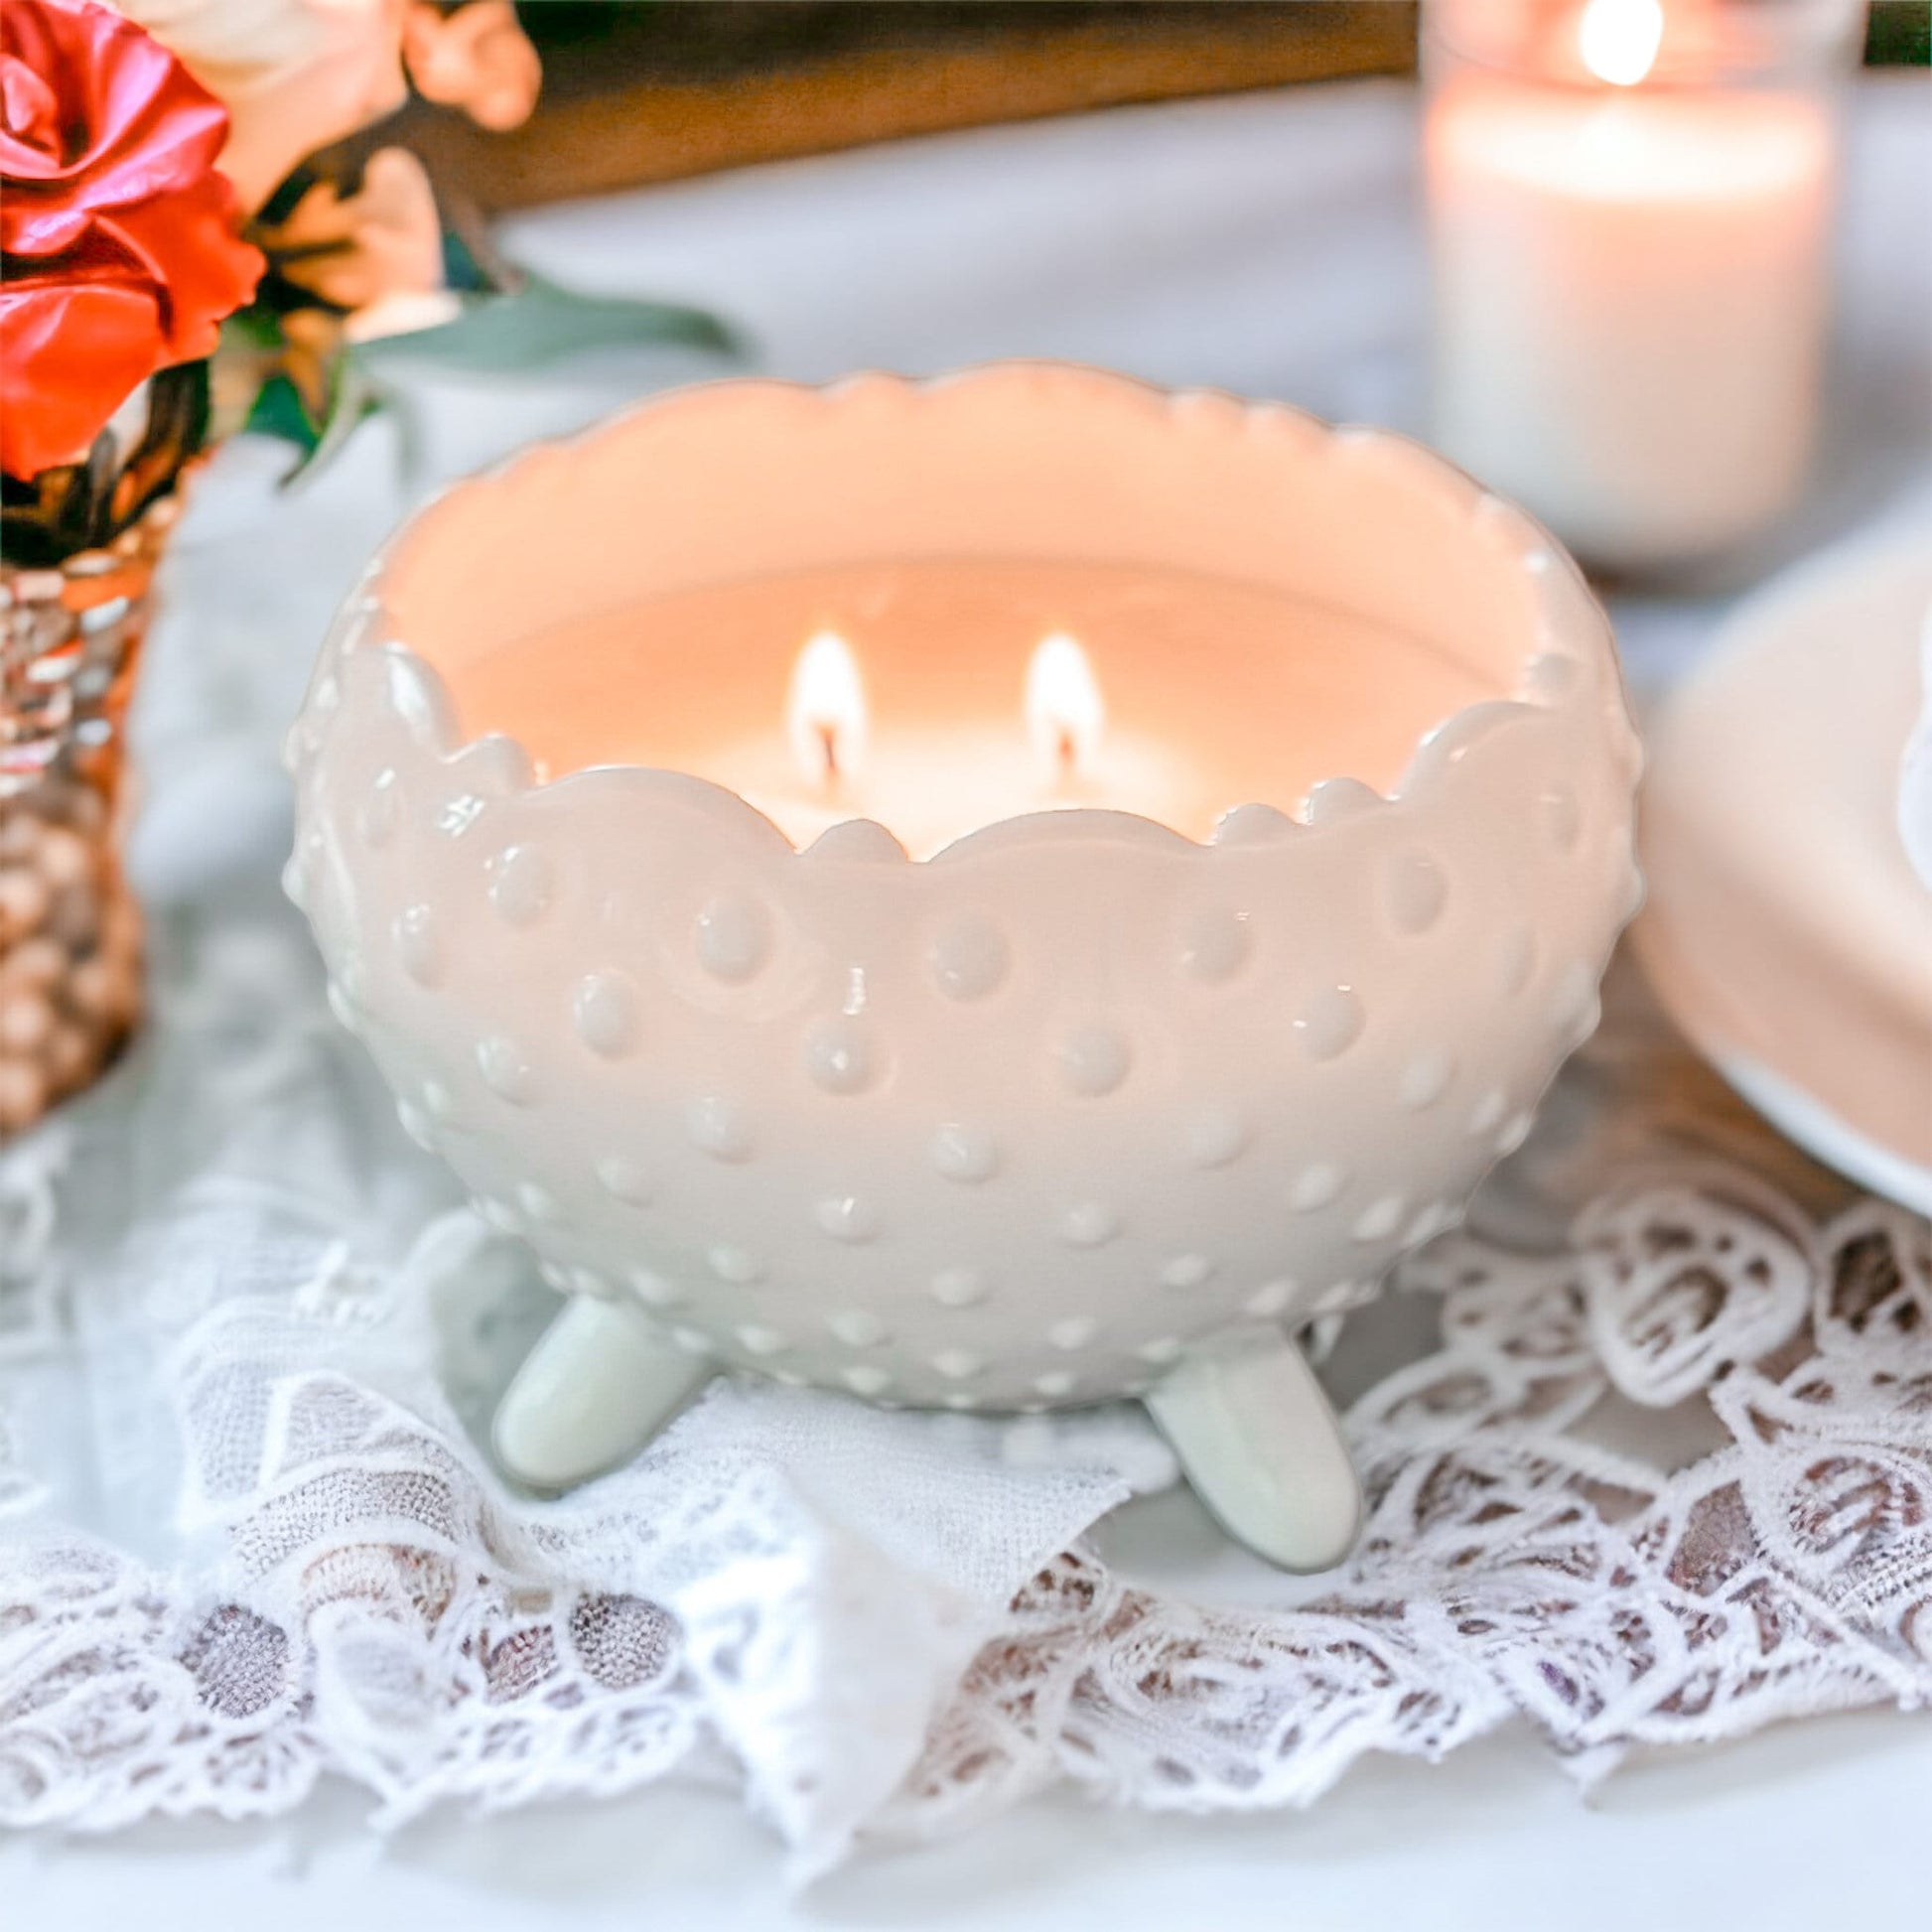 Soy Candles, Vintage, Milk Glass, Best Friend Gifts, Shabby Chic